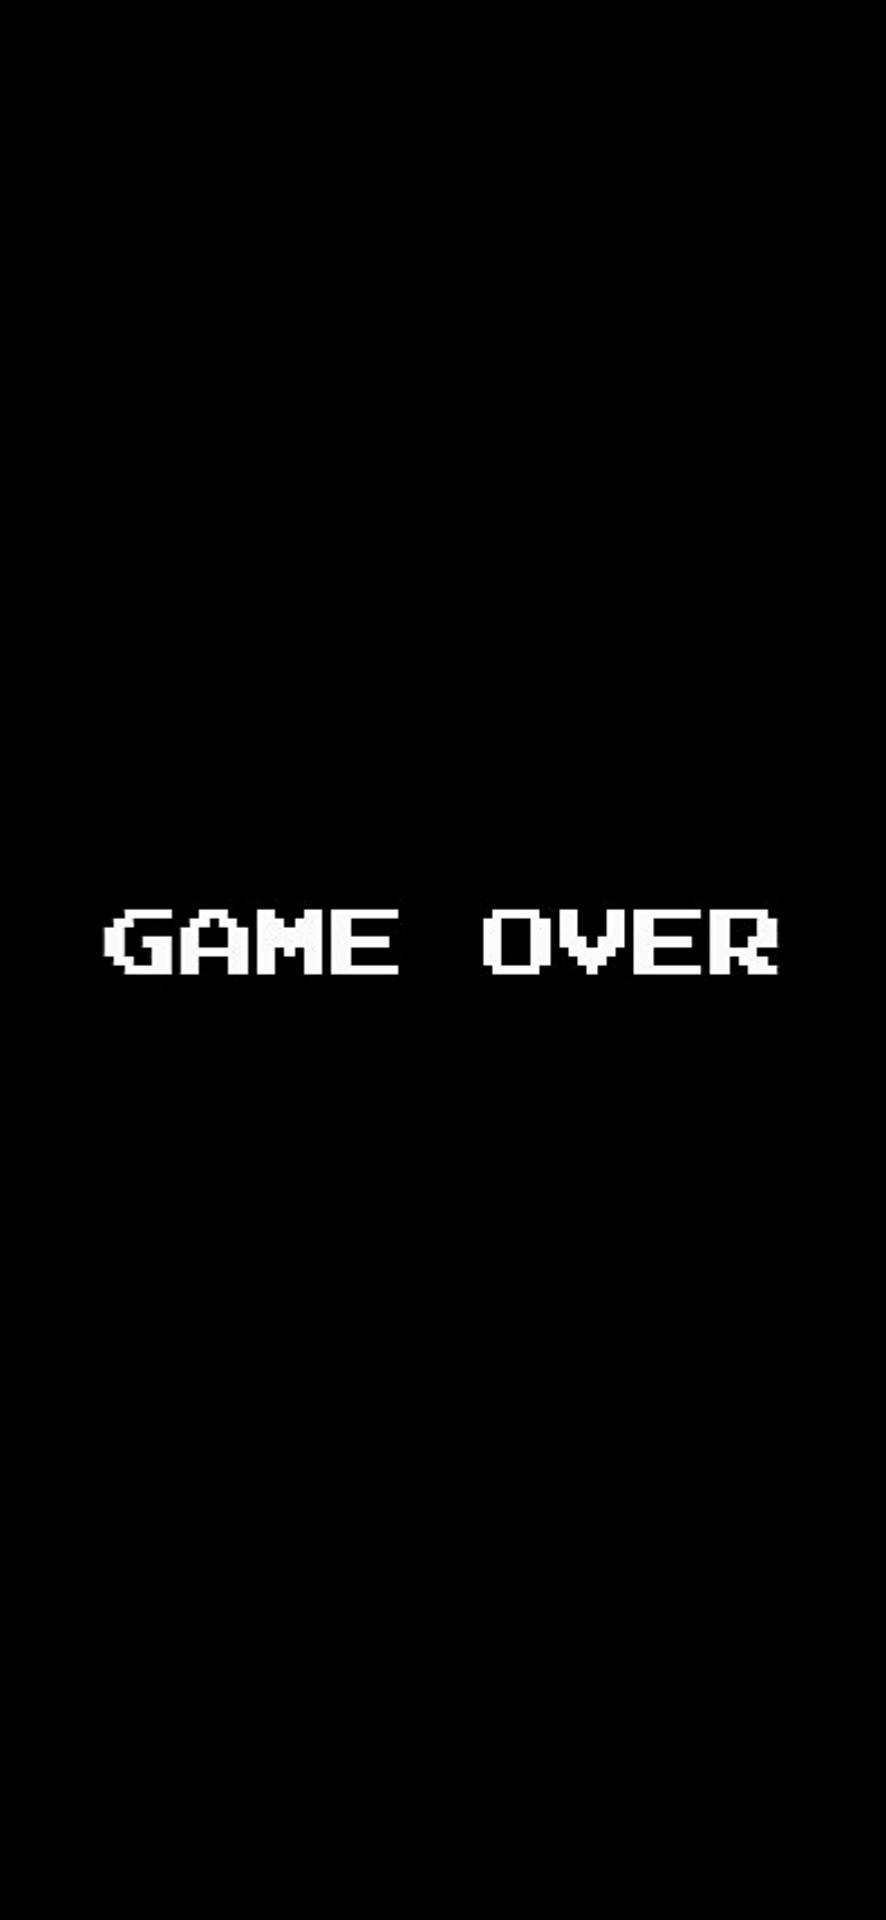 Game Over Skull iPhone Wallpaper HD  iPhone Wallpapers